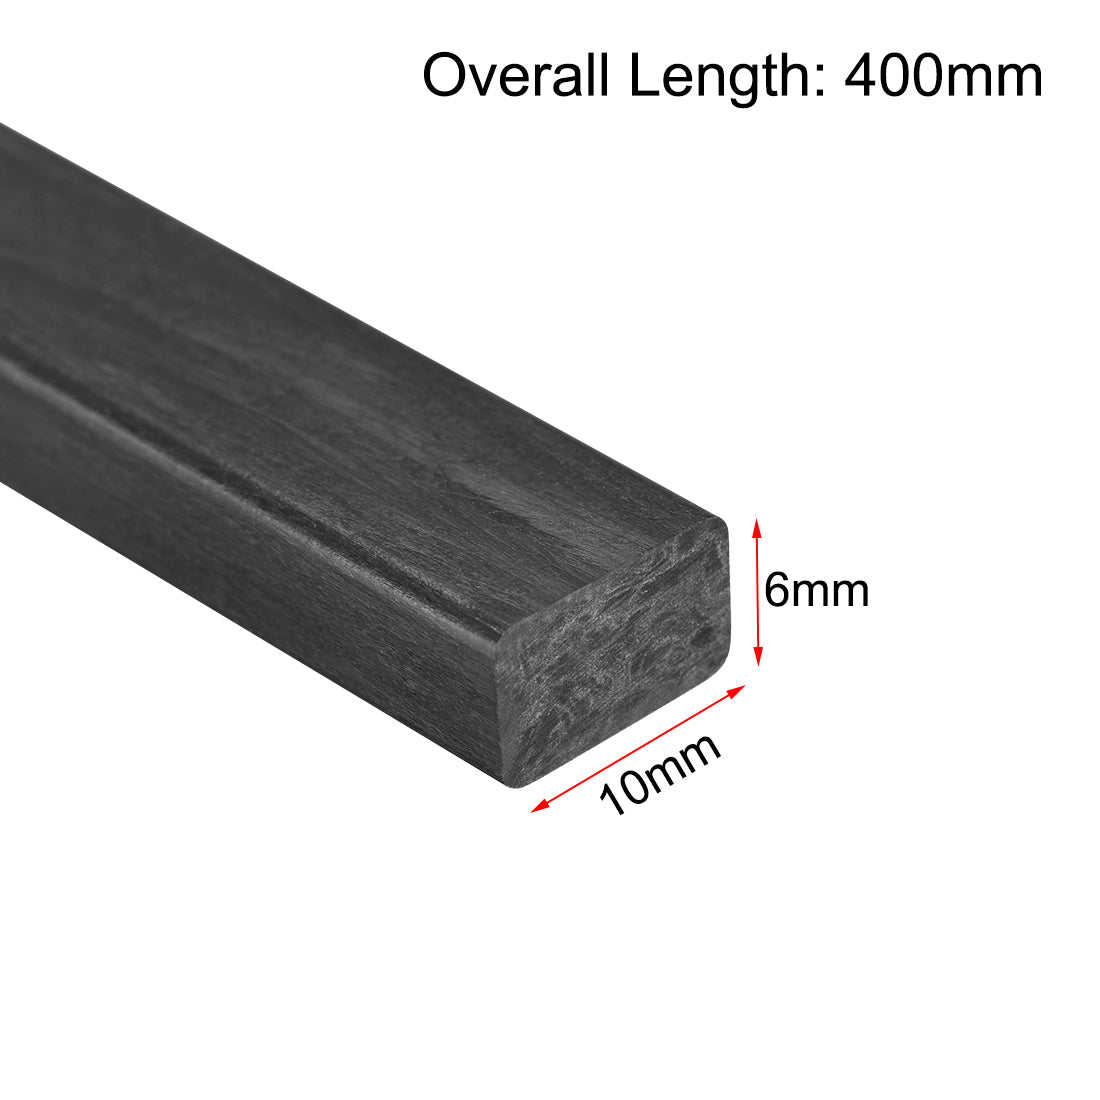 uxcell Uxcell Carbon Fiber Strip Bars 6x10mm 400mm Length Pultruded Carbon Fiber Strips for Kites, RC Airplane 1 Pcs